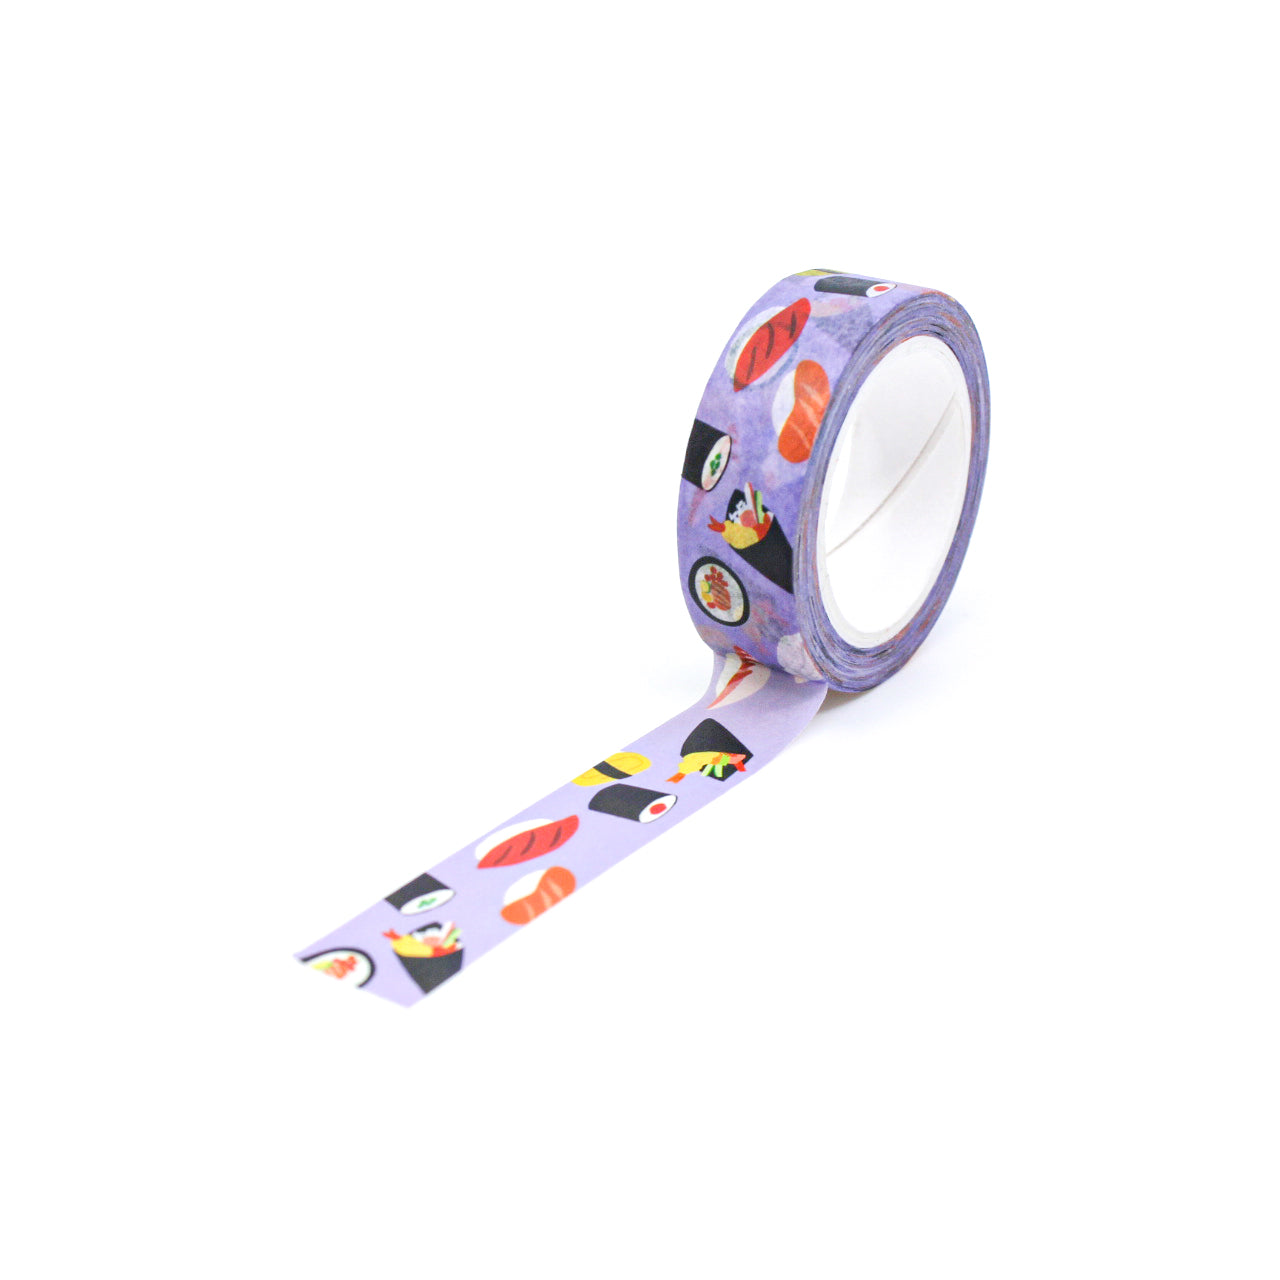 Add a tasty twist to your crafts with our Sushi Washi Tape, featuring delightful sushi illustrations. Perfect for adding a touch of Japanese culinary charm to your projects. This tape is designed by Girl of All Work and sold at BBB Supplies Craft Shop.